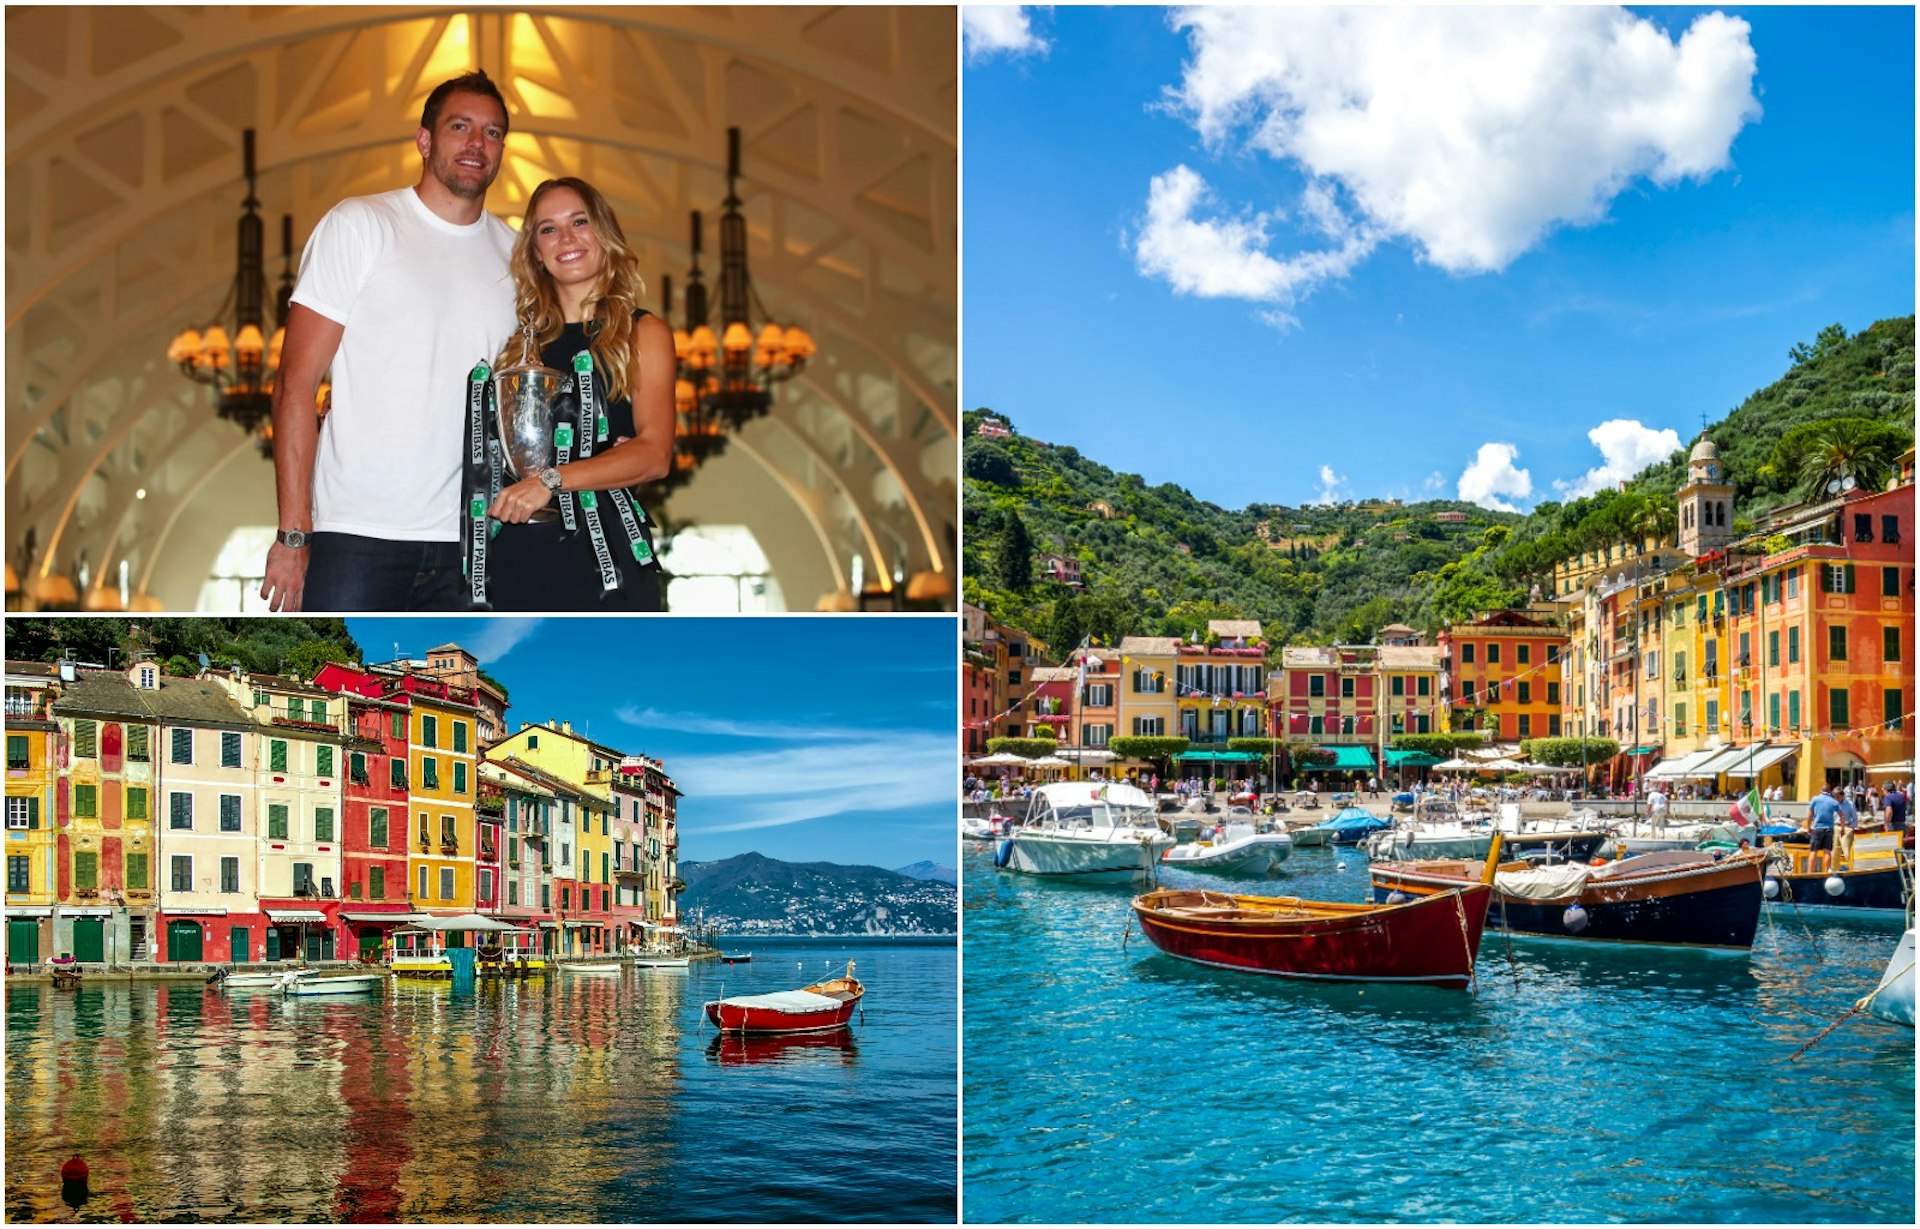 Clockwise from top left: Caroline Wozniaki and David Lee pose together under a vaulted ceiling whil Wozniaki holds her trophy; a harbour scene in Portofino, with small boats floating in the blue water and yellow and orange houses encircling the dock; multicoloured houses line the short and three boats are resting in the water. Hilltop views are visible in the background.